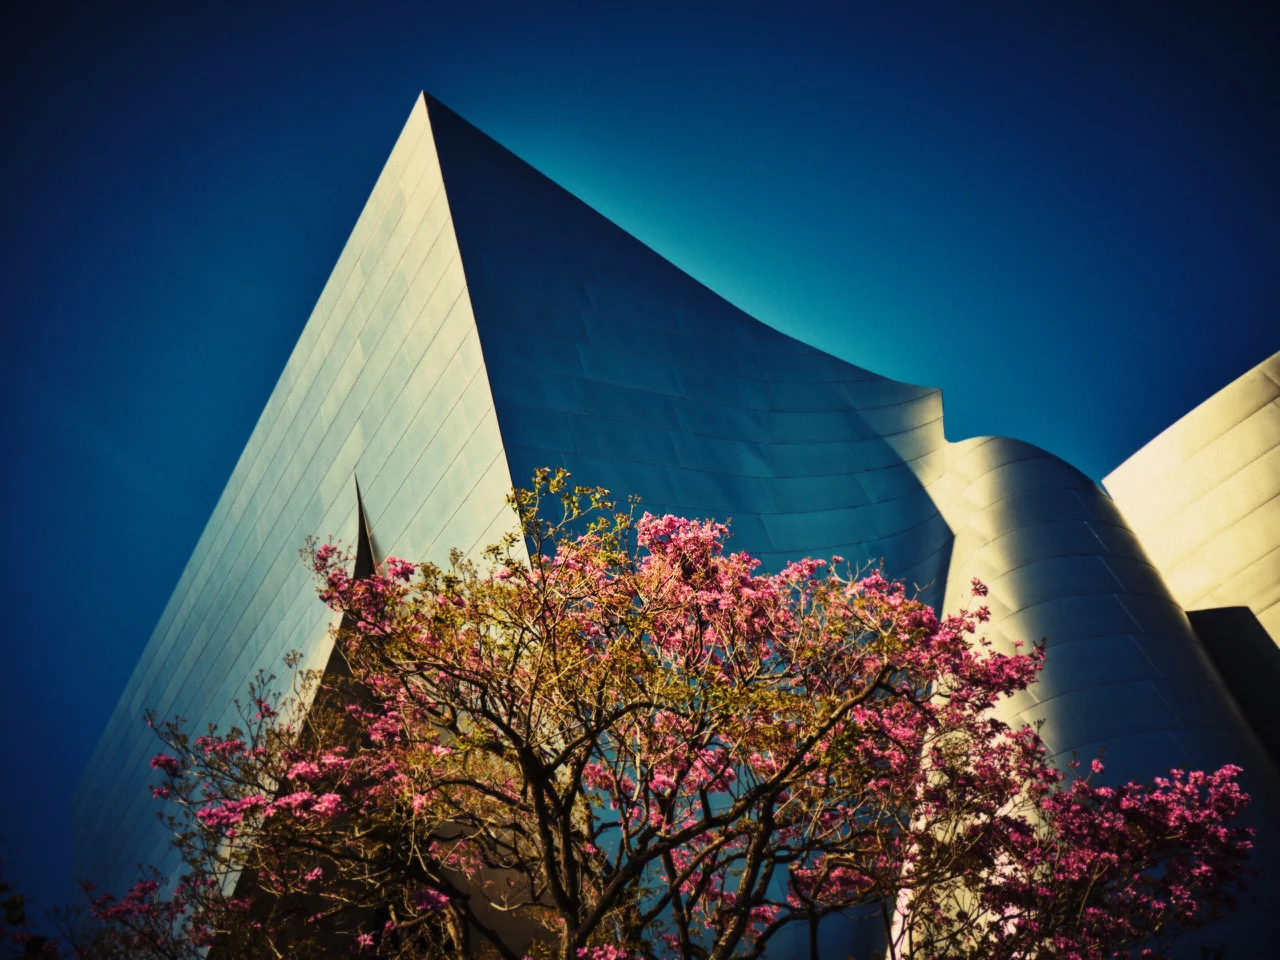 Los Angeles...of plants and steel 4 by Benjamin PICHELMANN